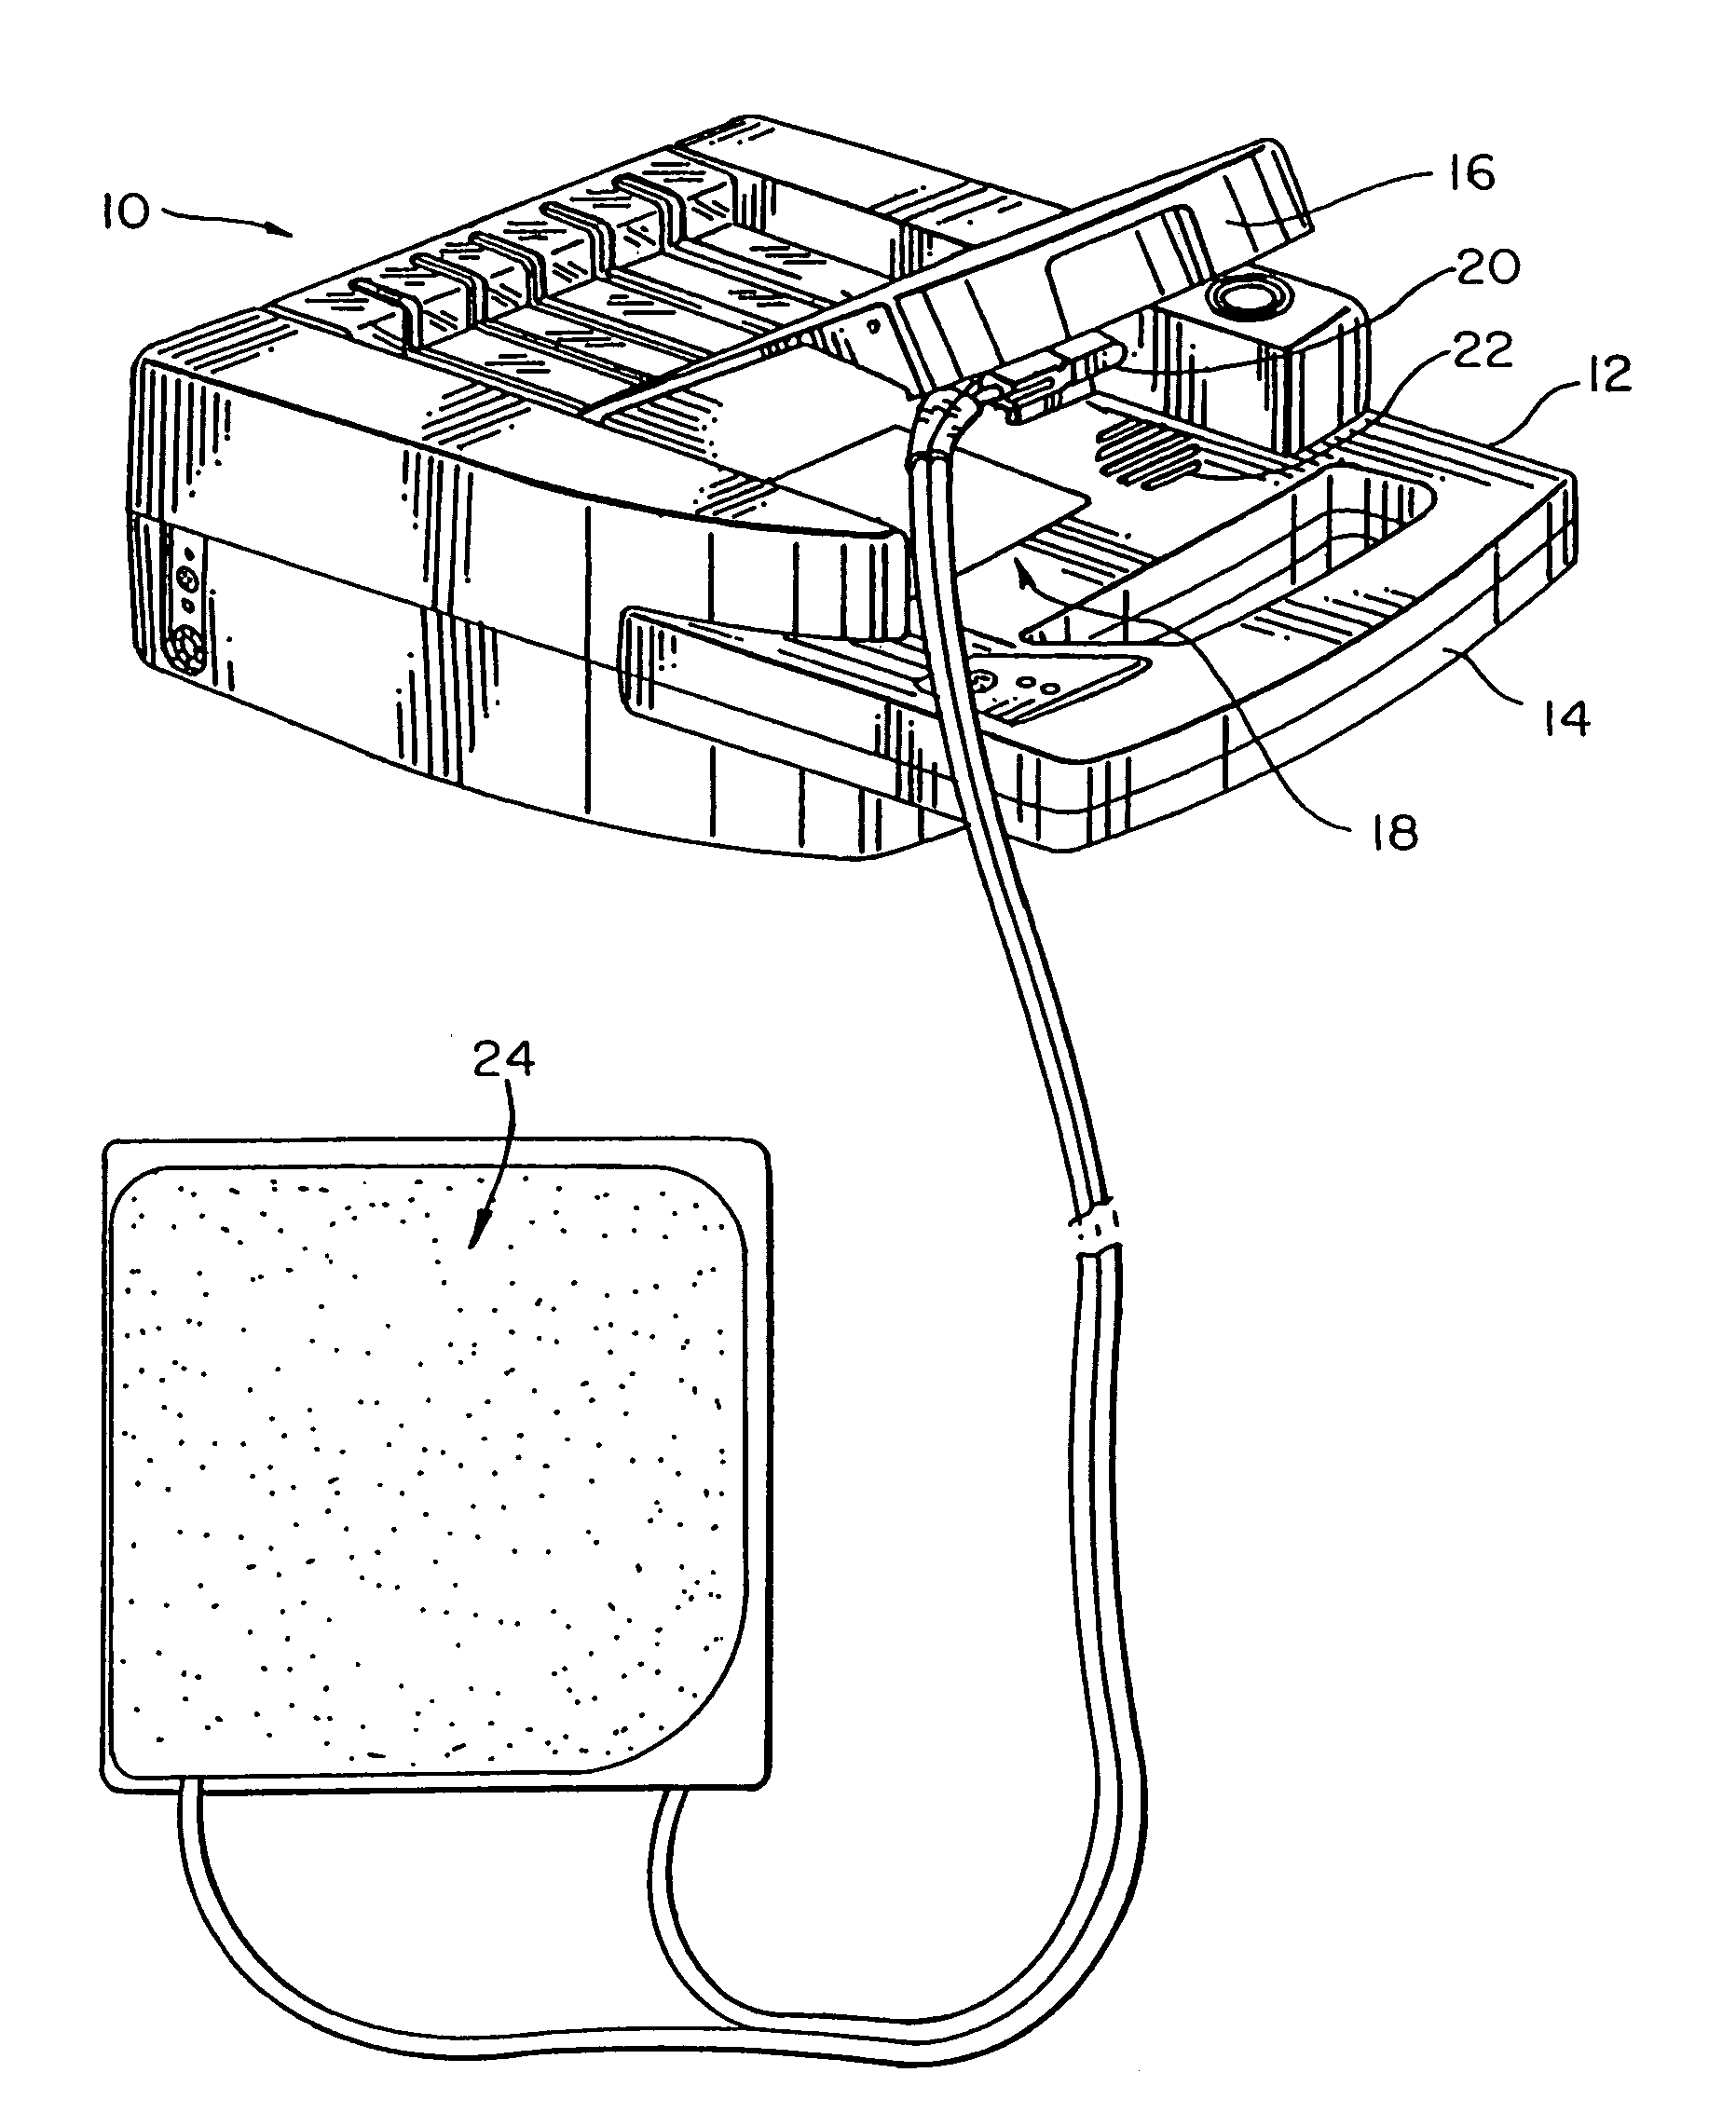 Method and apparatus for delivering a biphasic defibrillation pulse with variable energy